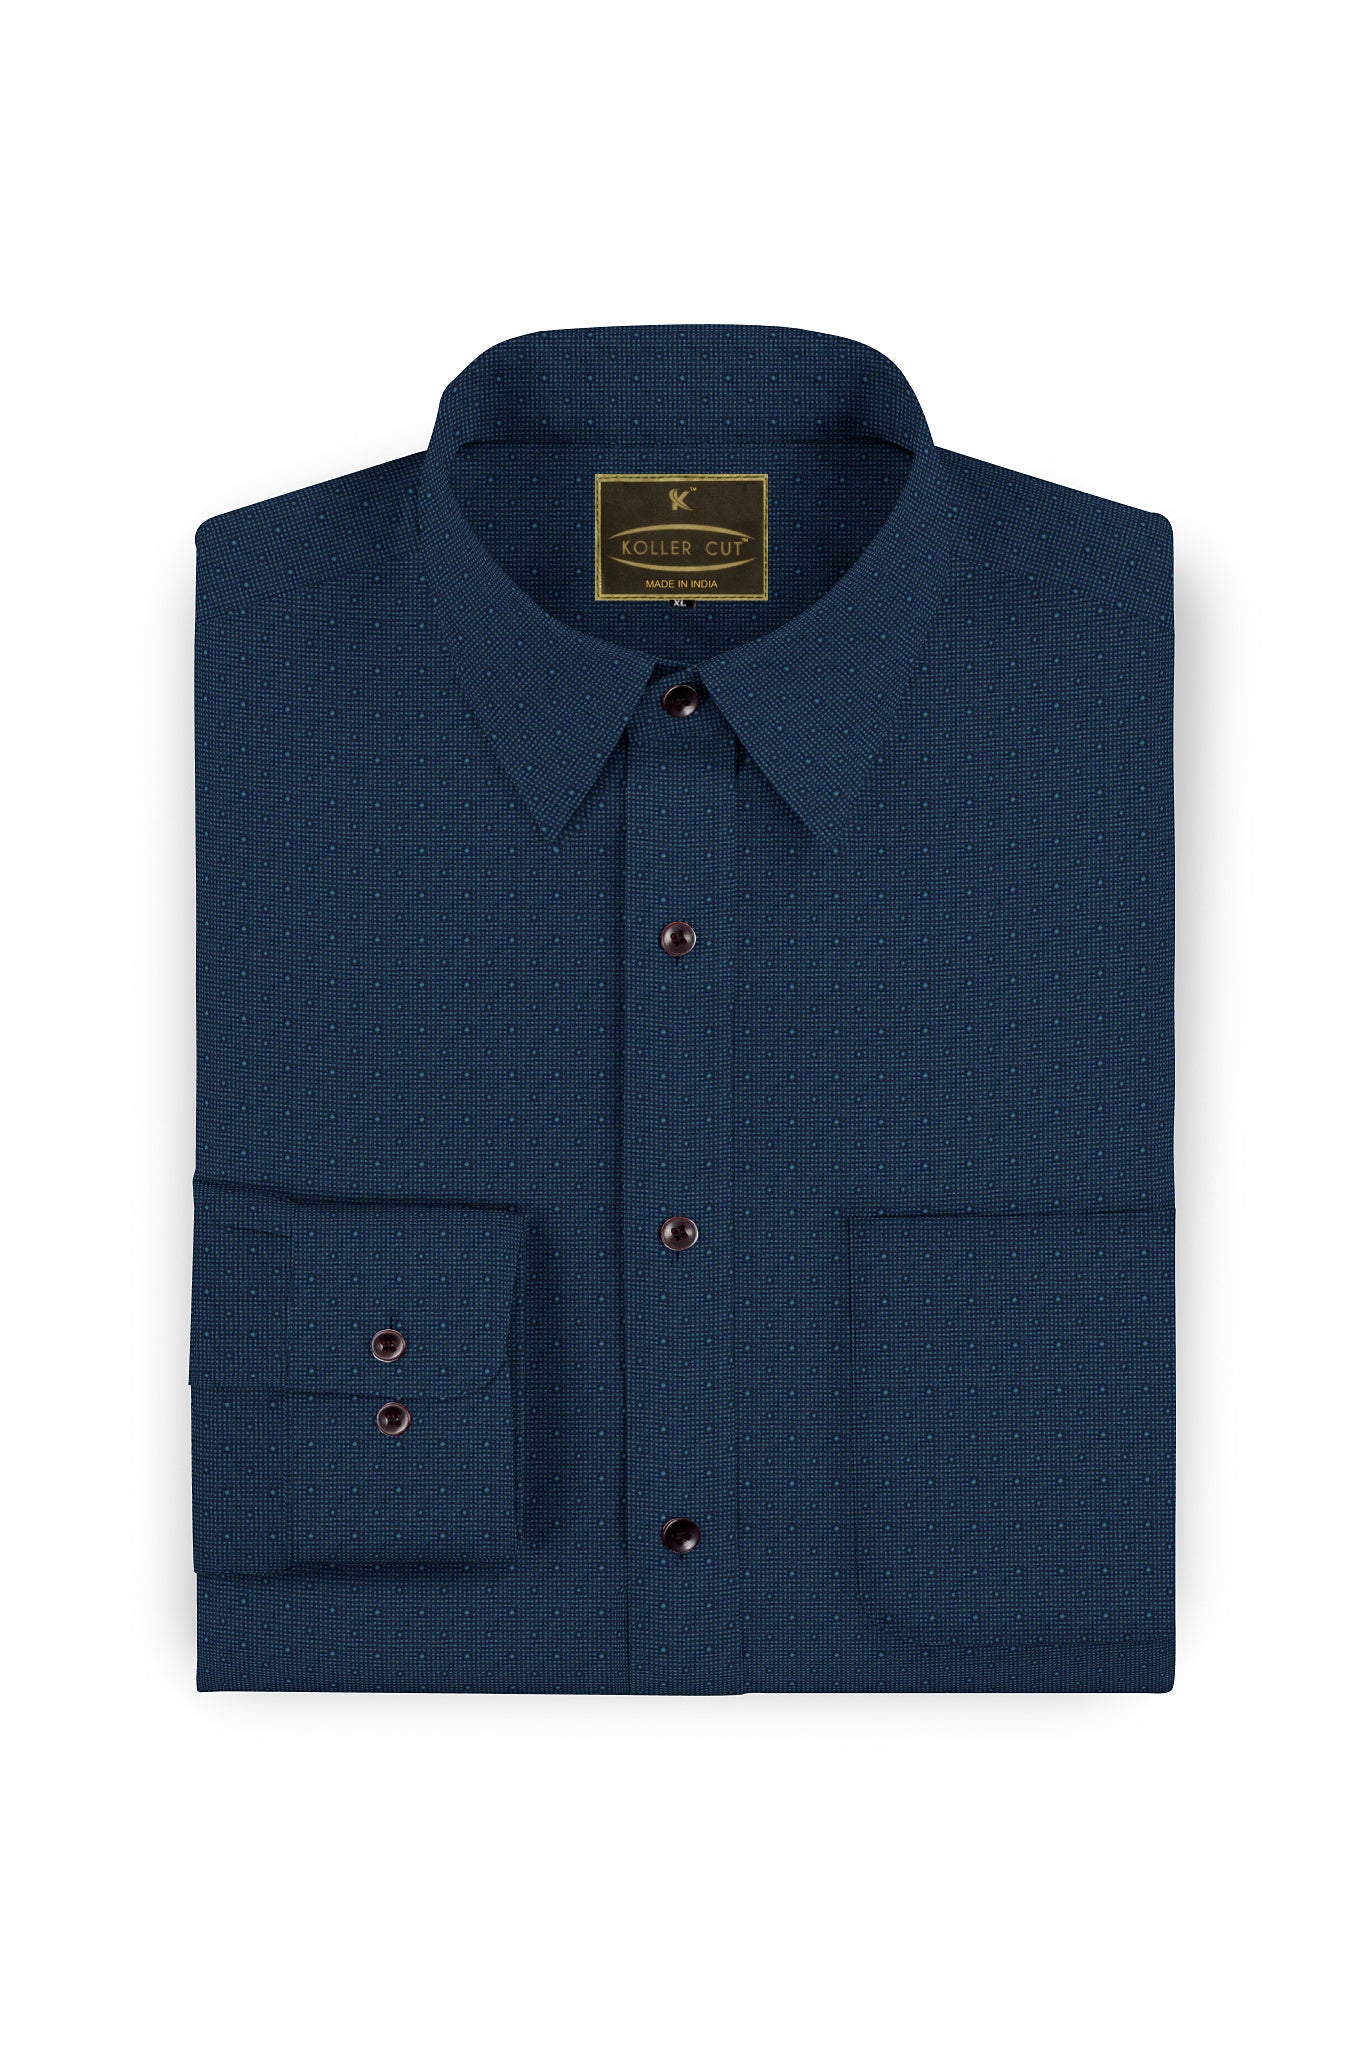 Navy with Carolina Blue Microdotted Mens Cotton Shirt